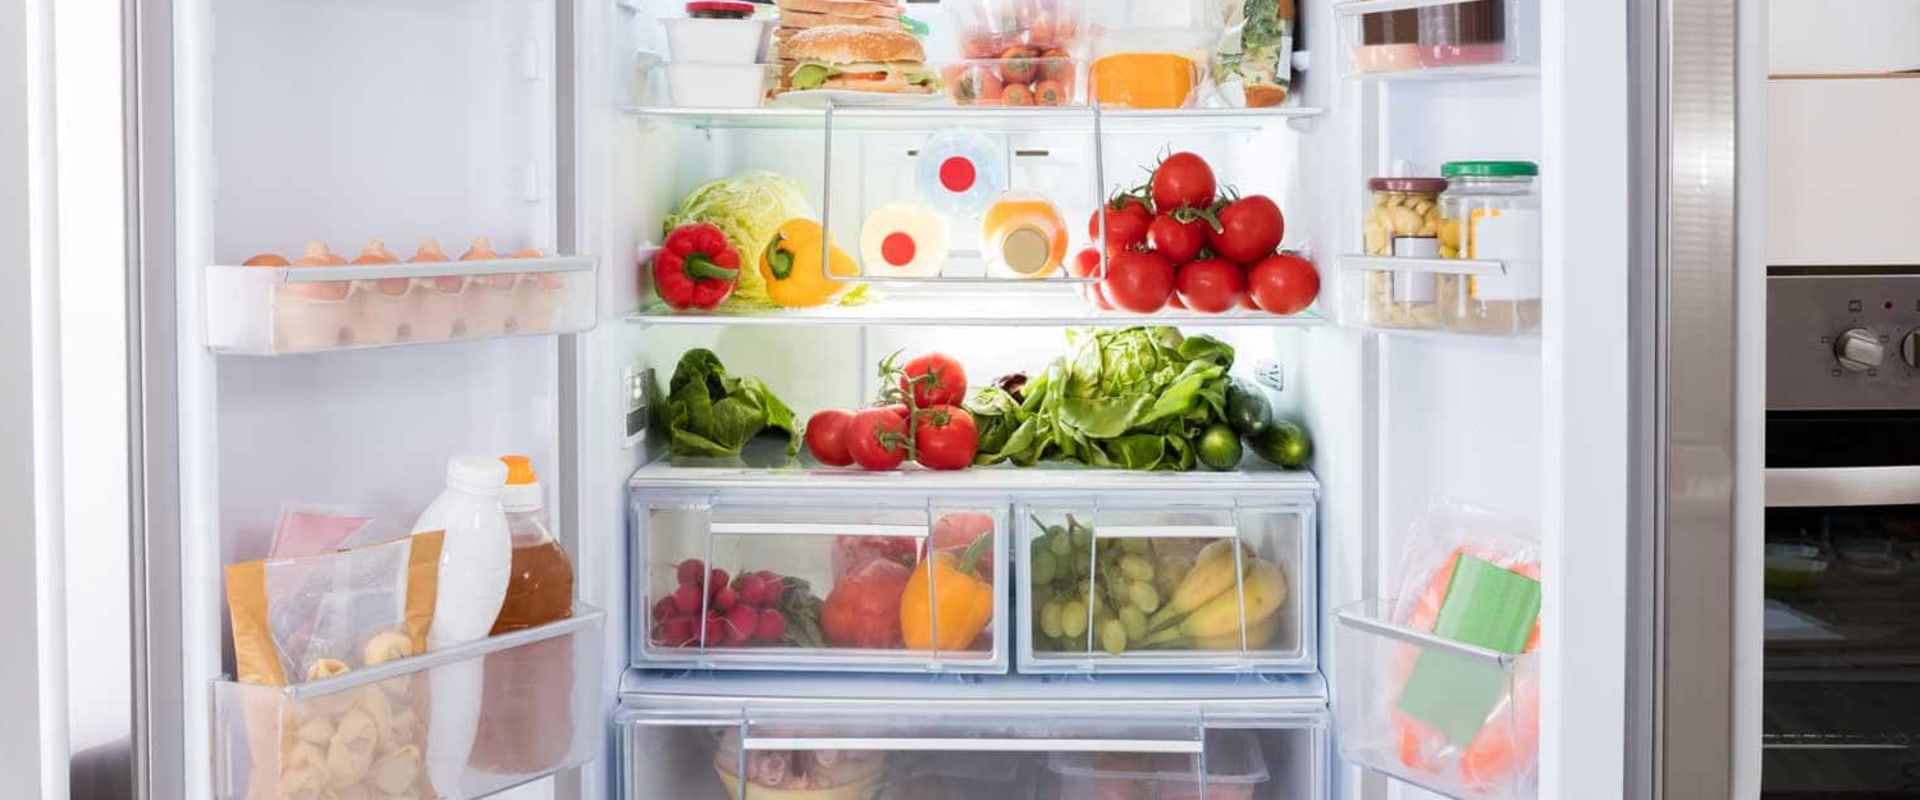 How to Extend the Life of Your Refrigerator